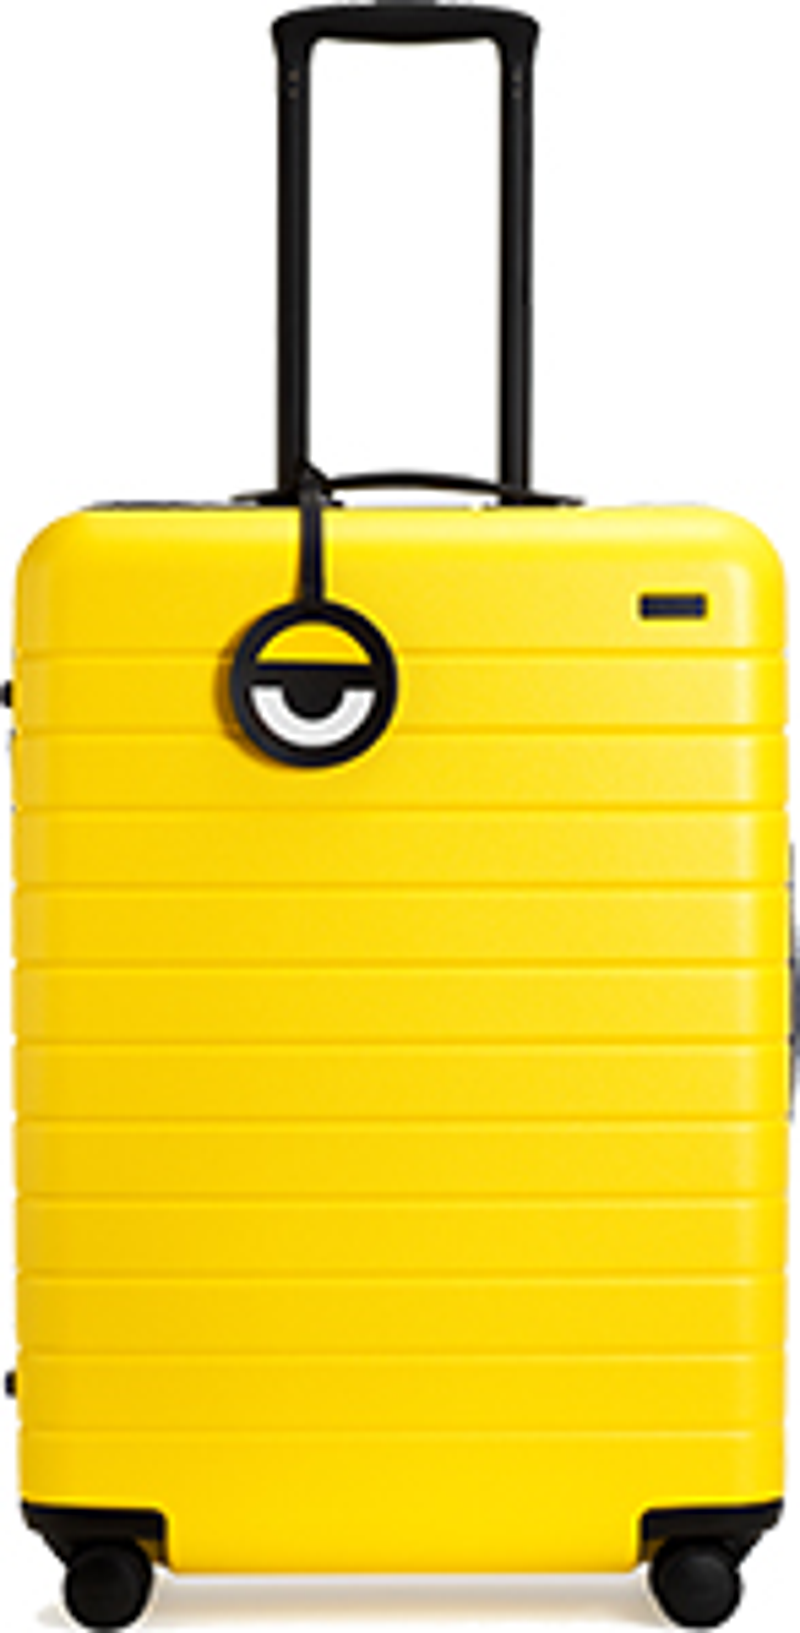 Shop Despicable Me 2 Minions Backpack – Luggage Factory